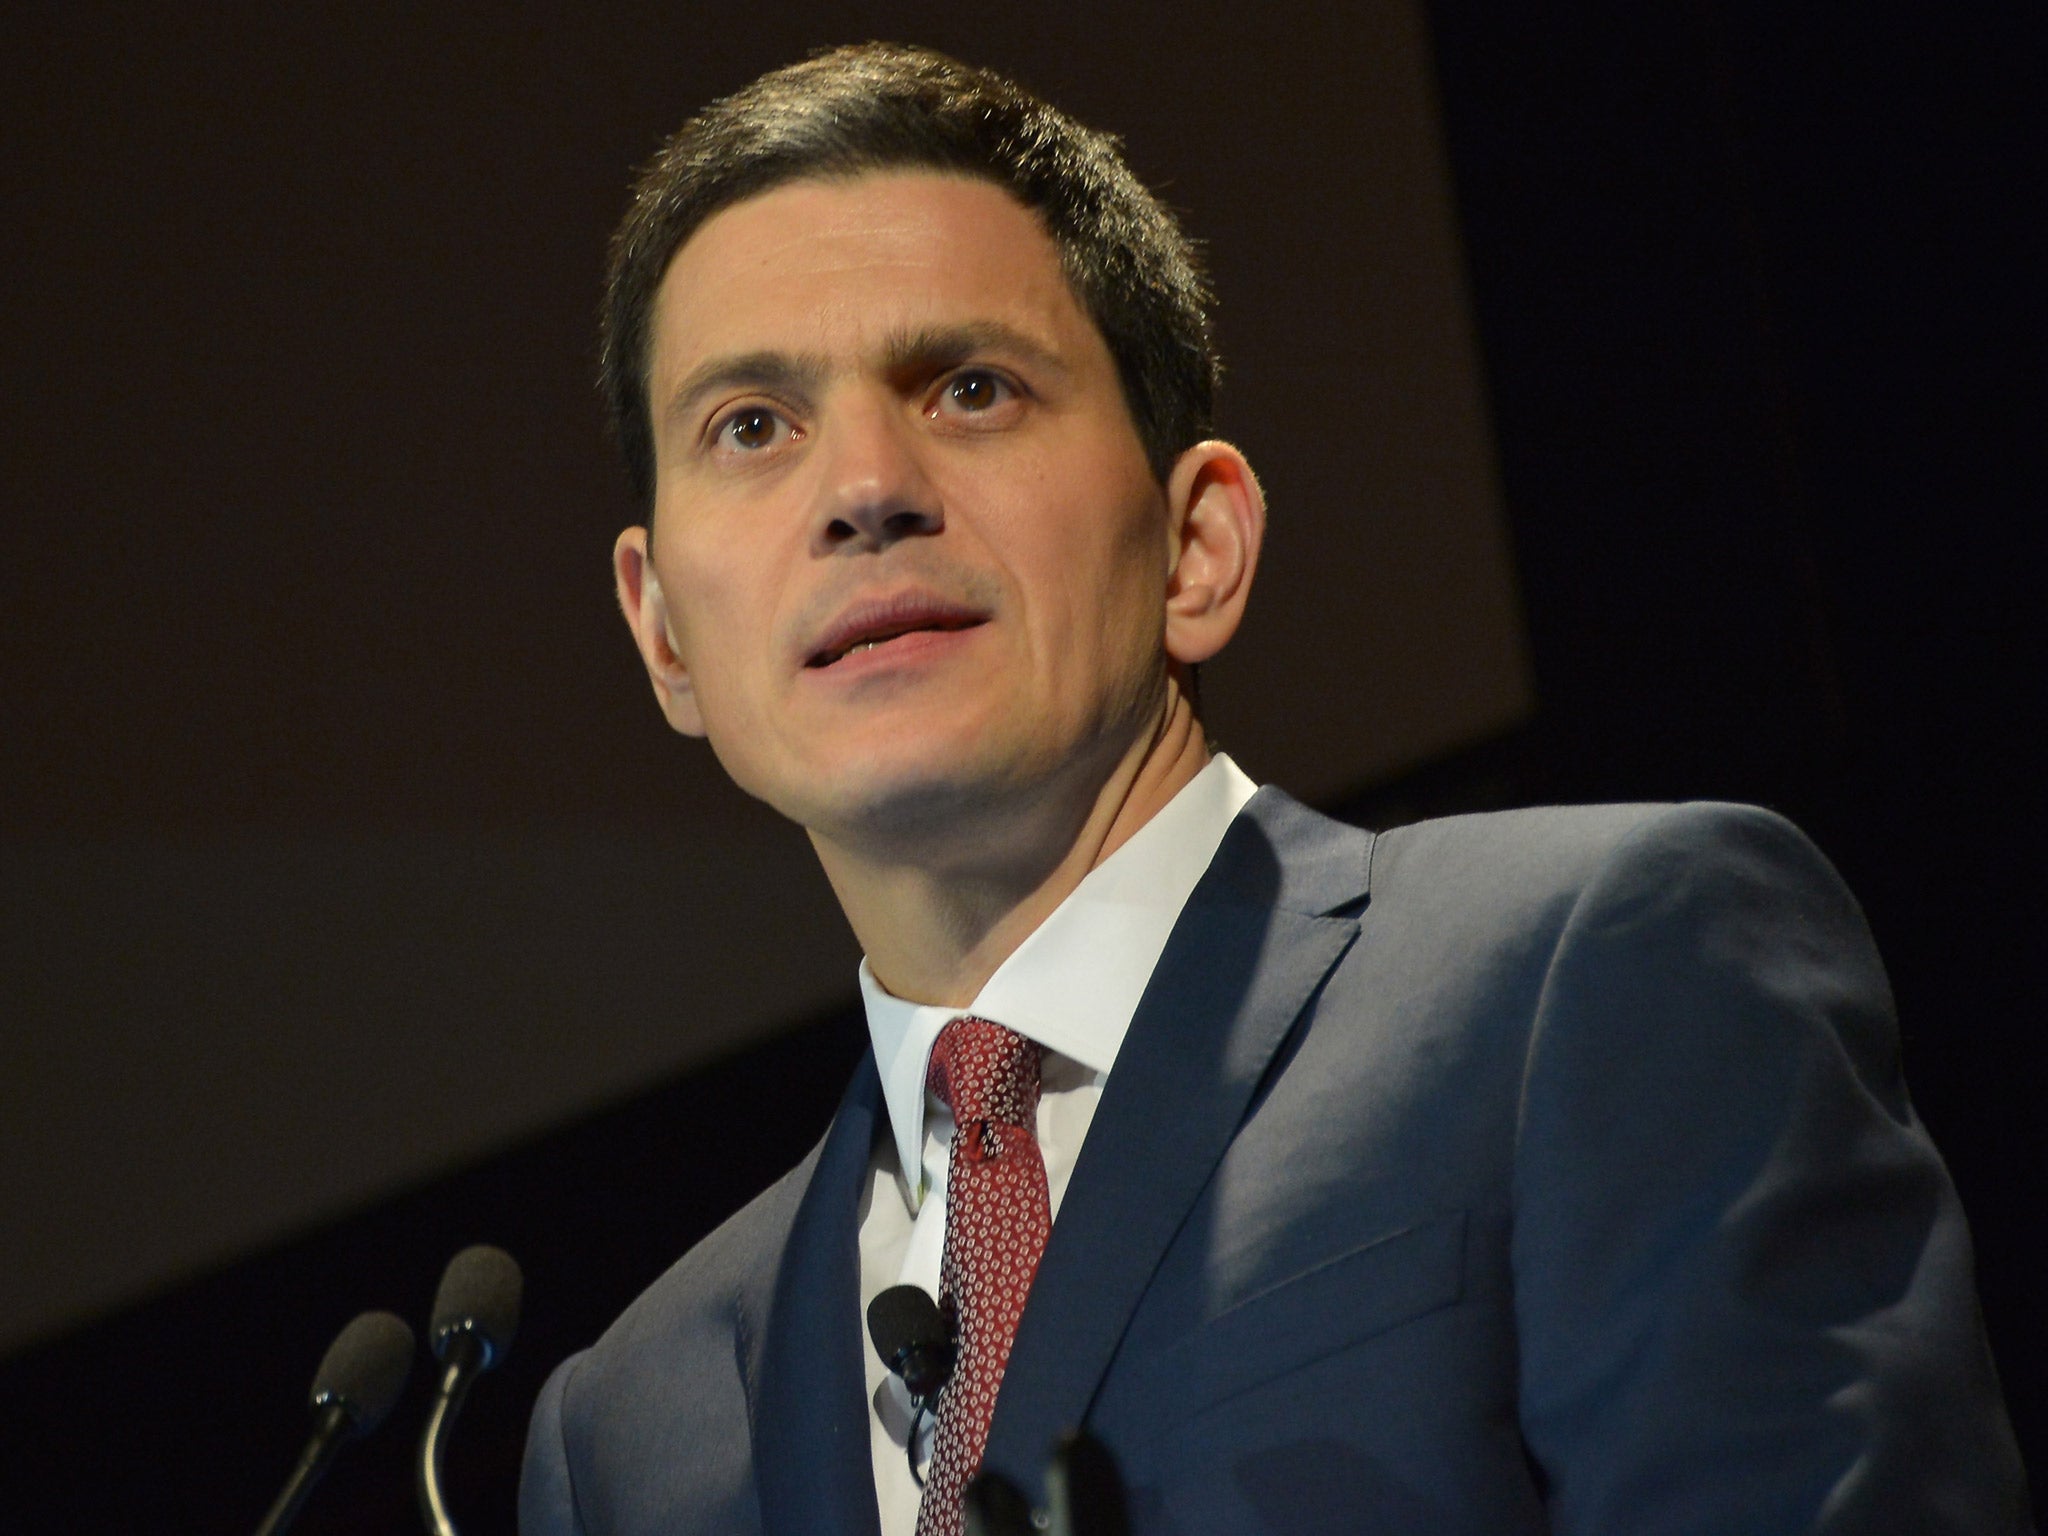 Since his brother's election defeat, David Miliband feels that he can speak out more freely on Labour matters